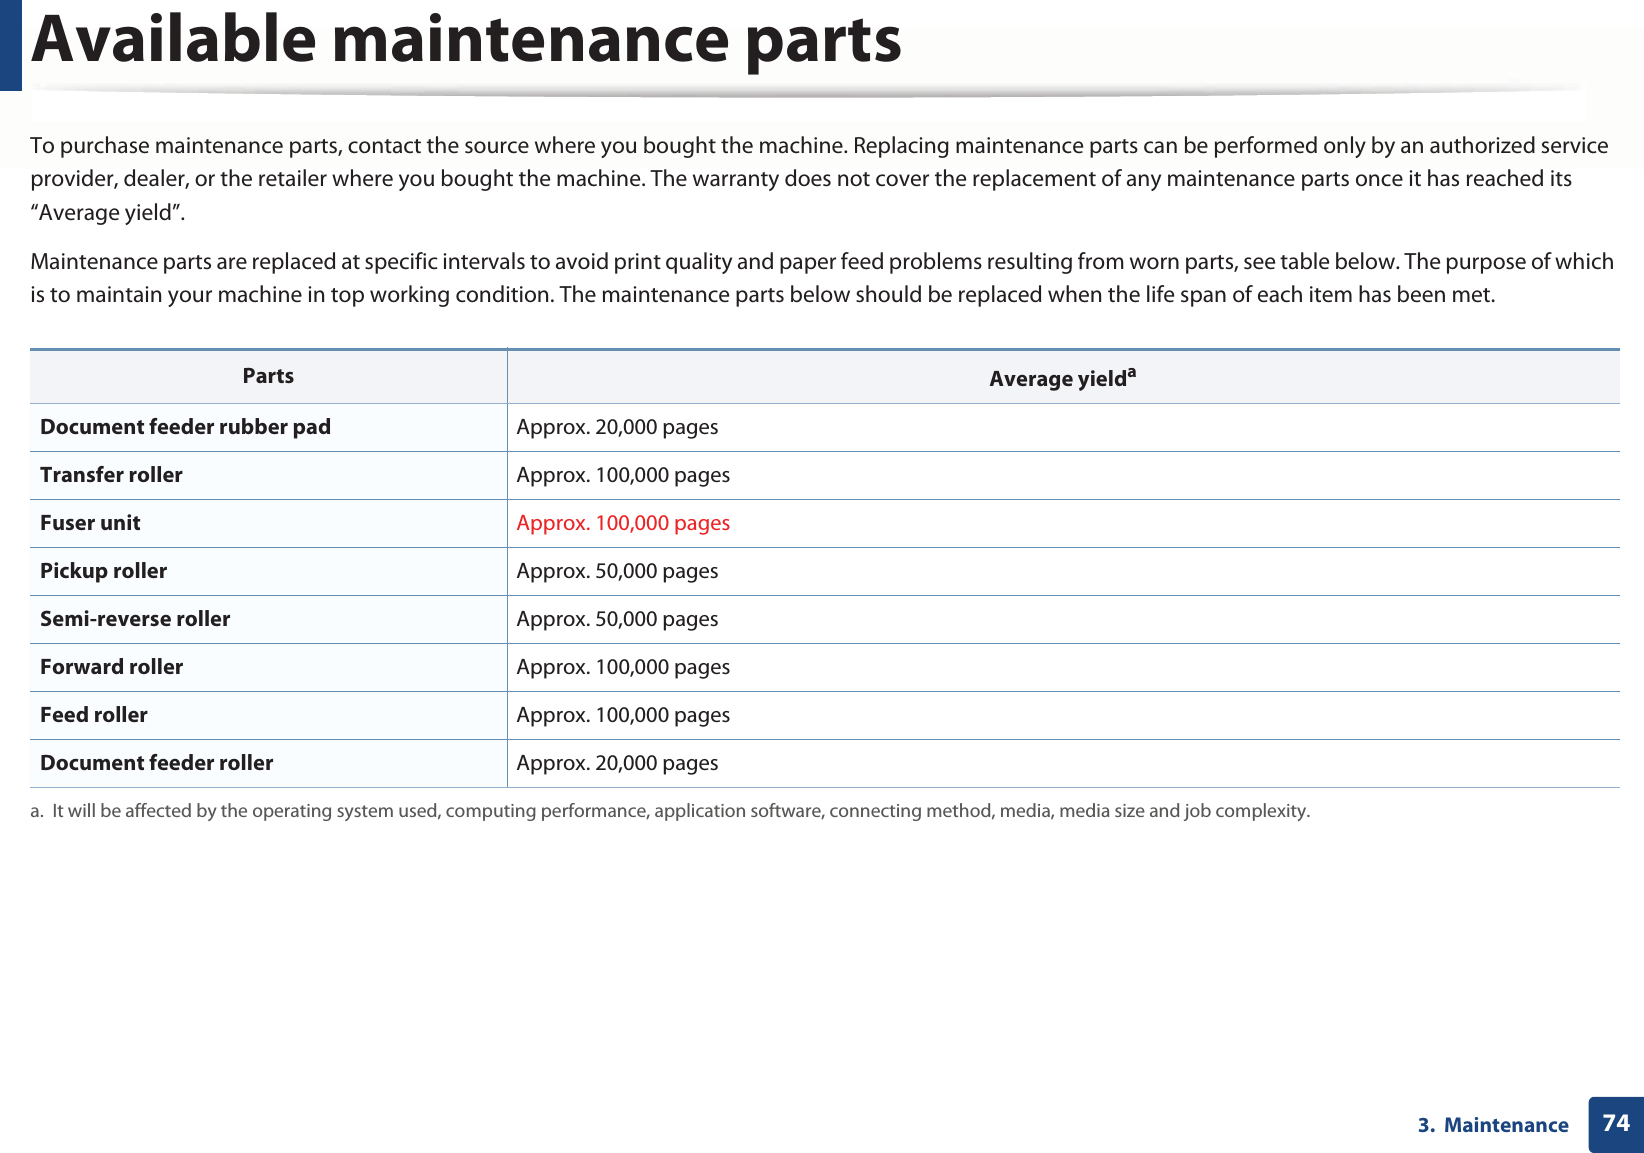 743.  MaintenanceAvailable maintenance partsTo purchase maintenance parts, contact the source where you bought the machine. Replacing maintenance parts can be performed only by an authorized service provider, dealer, or the retailer where you bought the machine. The warranty does not cover the replacement of any maintenance parts once it has reached its “Average yield”.Maintenance parts are replaced at specific intervals to avoid print quality and paper feed problems resulting from worn parts, see table below. The purpose of which is to maintain your machine in top working condition. The maintenance parts below should be replaced when the life span of each item has been met.Parts Average yieldaa. It will be affected by the operating system used, computing performance, application software, connecting method, media, media size and job complexity.Document feeder rubber pad Approx. 20,000 pagesTransfer roller Approx. 100,000 pages Fuser unit Approx. 100,000 pagesPickup roller Approx. 50,000 pagesSemi-reverse roller Approx. 50,000 pagesForward roller Approx. 100,000 pagesFeed roller Approx. 100,000 pagesDocument feeder roller Approx. 20,000 pages